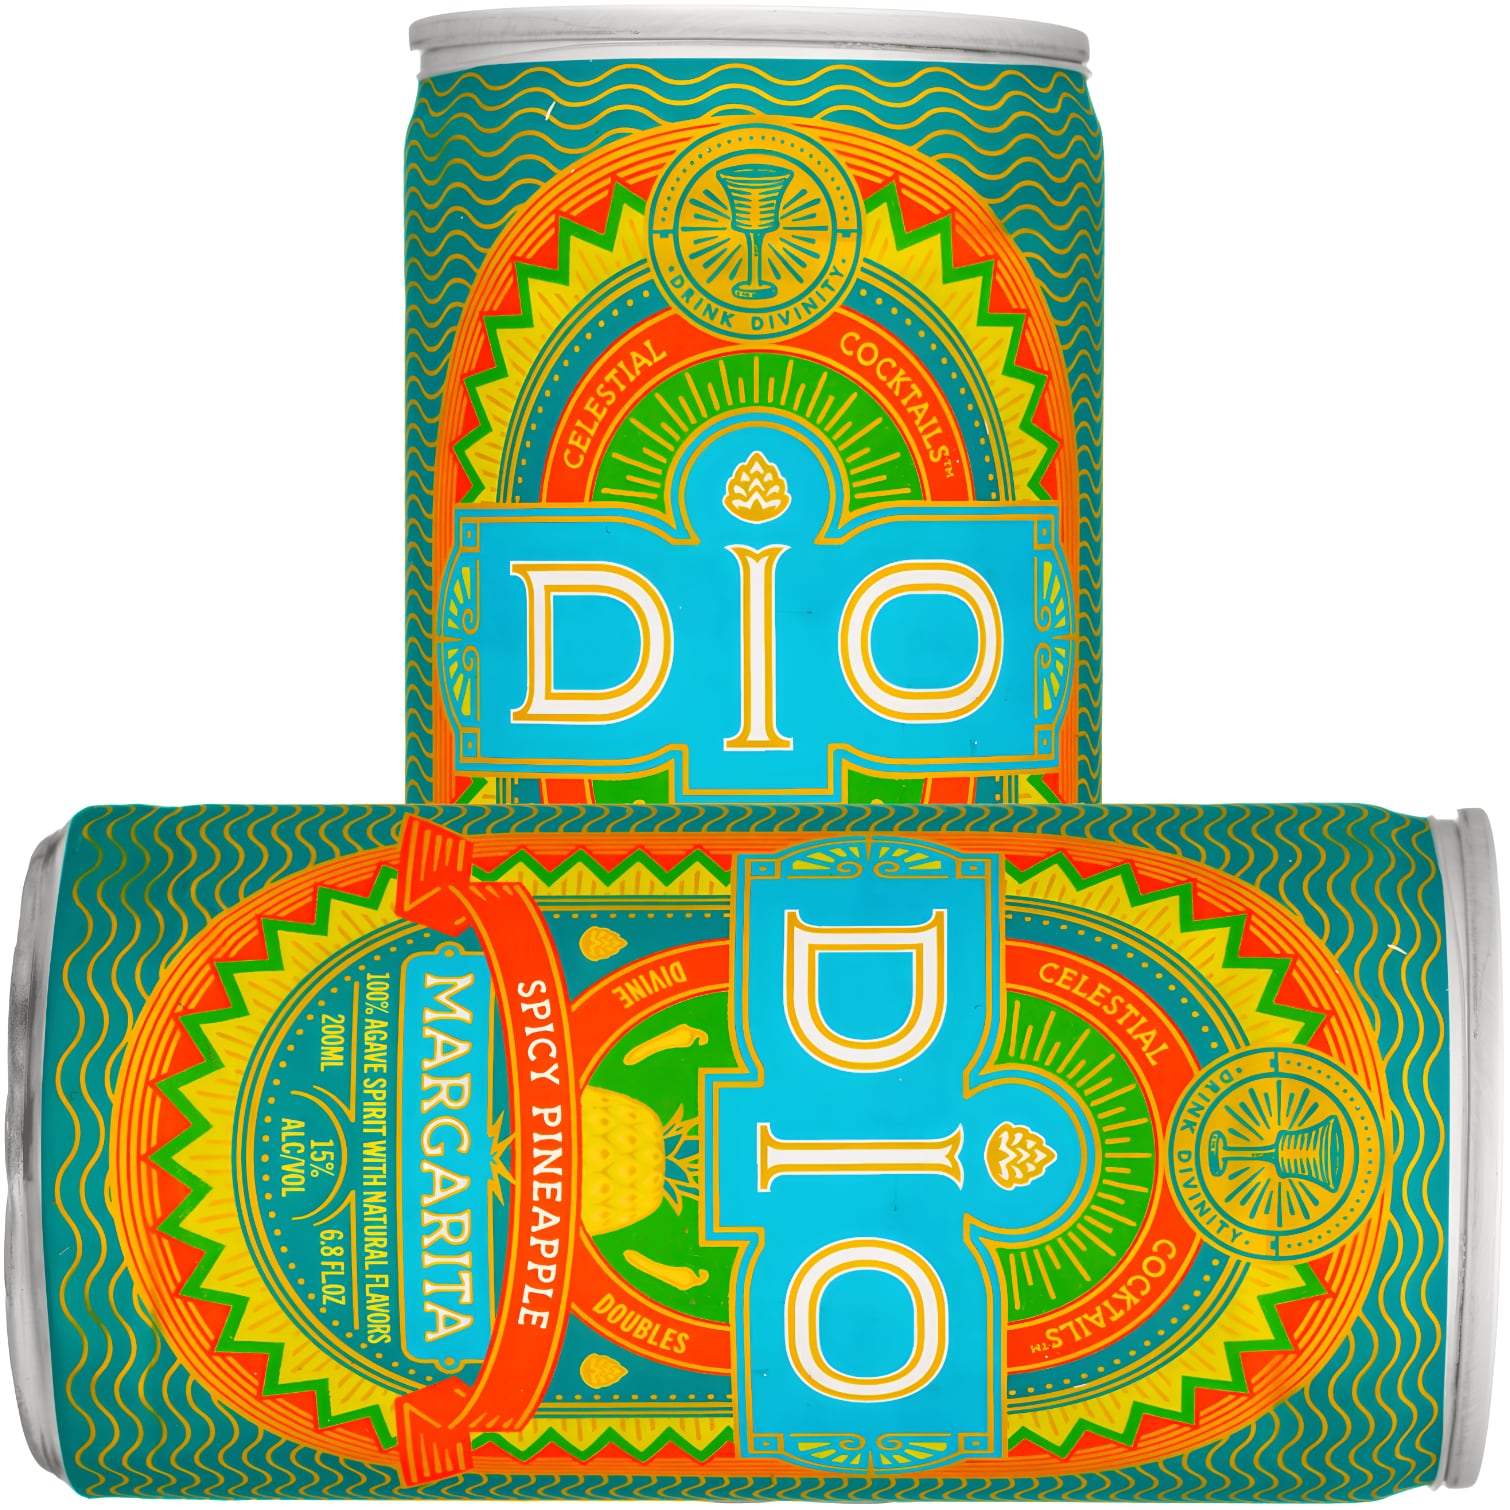 Free Dio Canned Cocktails after rebate